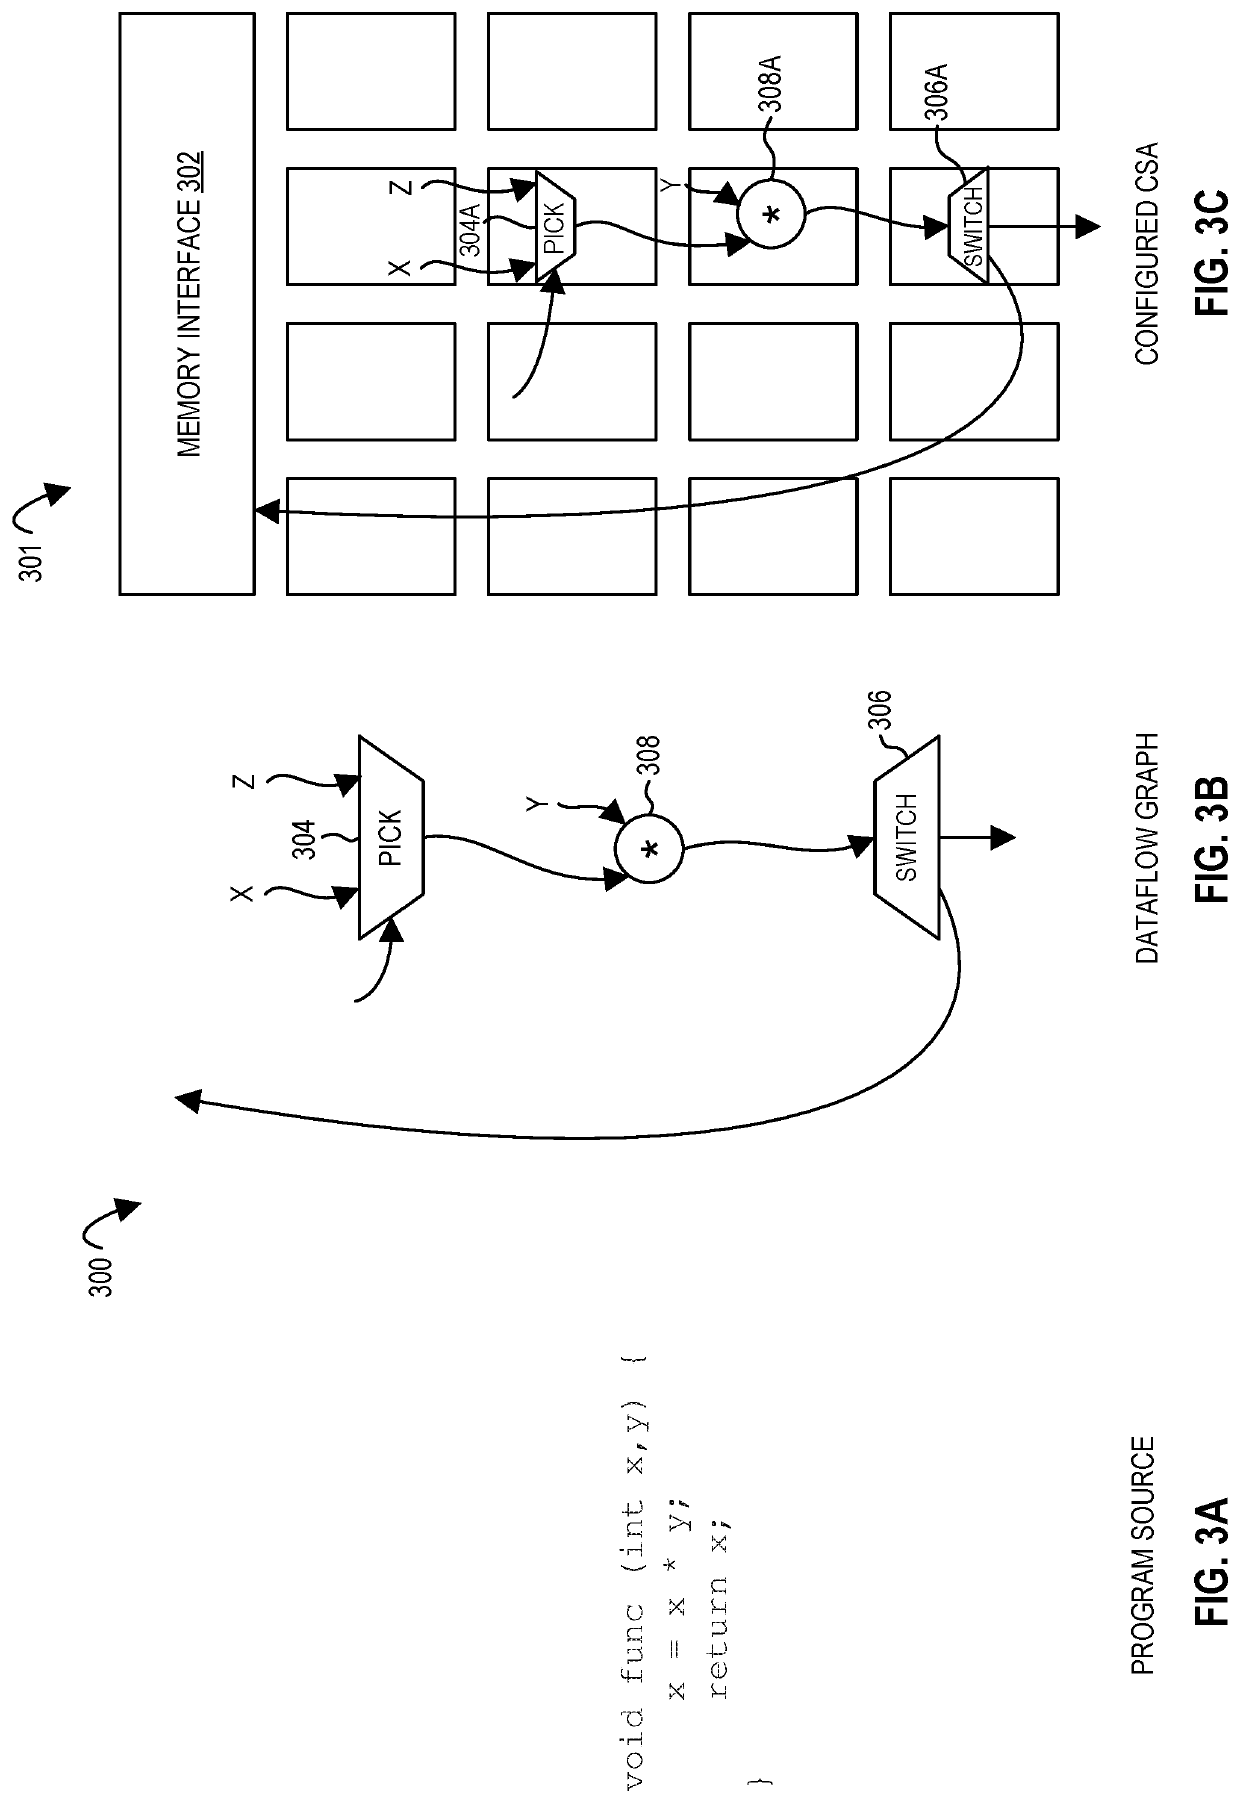 Apparatuses, methods, and systems for configurable operand size operations in an operation configurable spatial accelerator